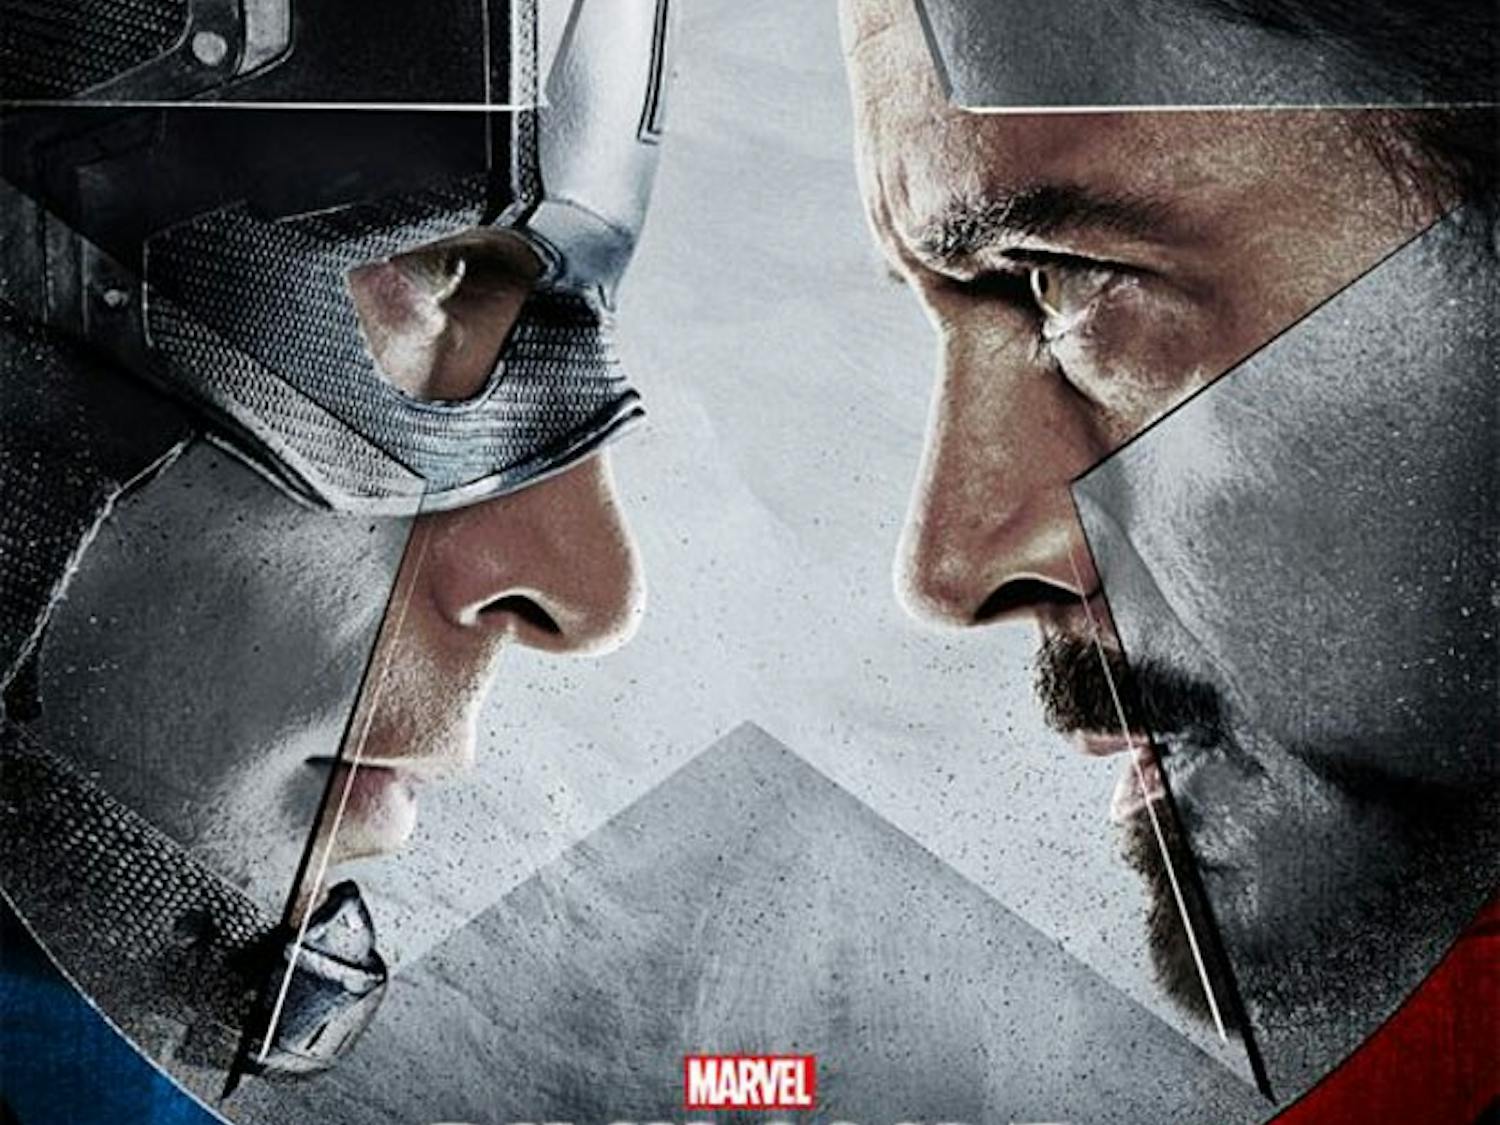 “Captain America: Civil War” will appear in theaters on May 6.